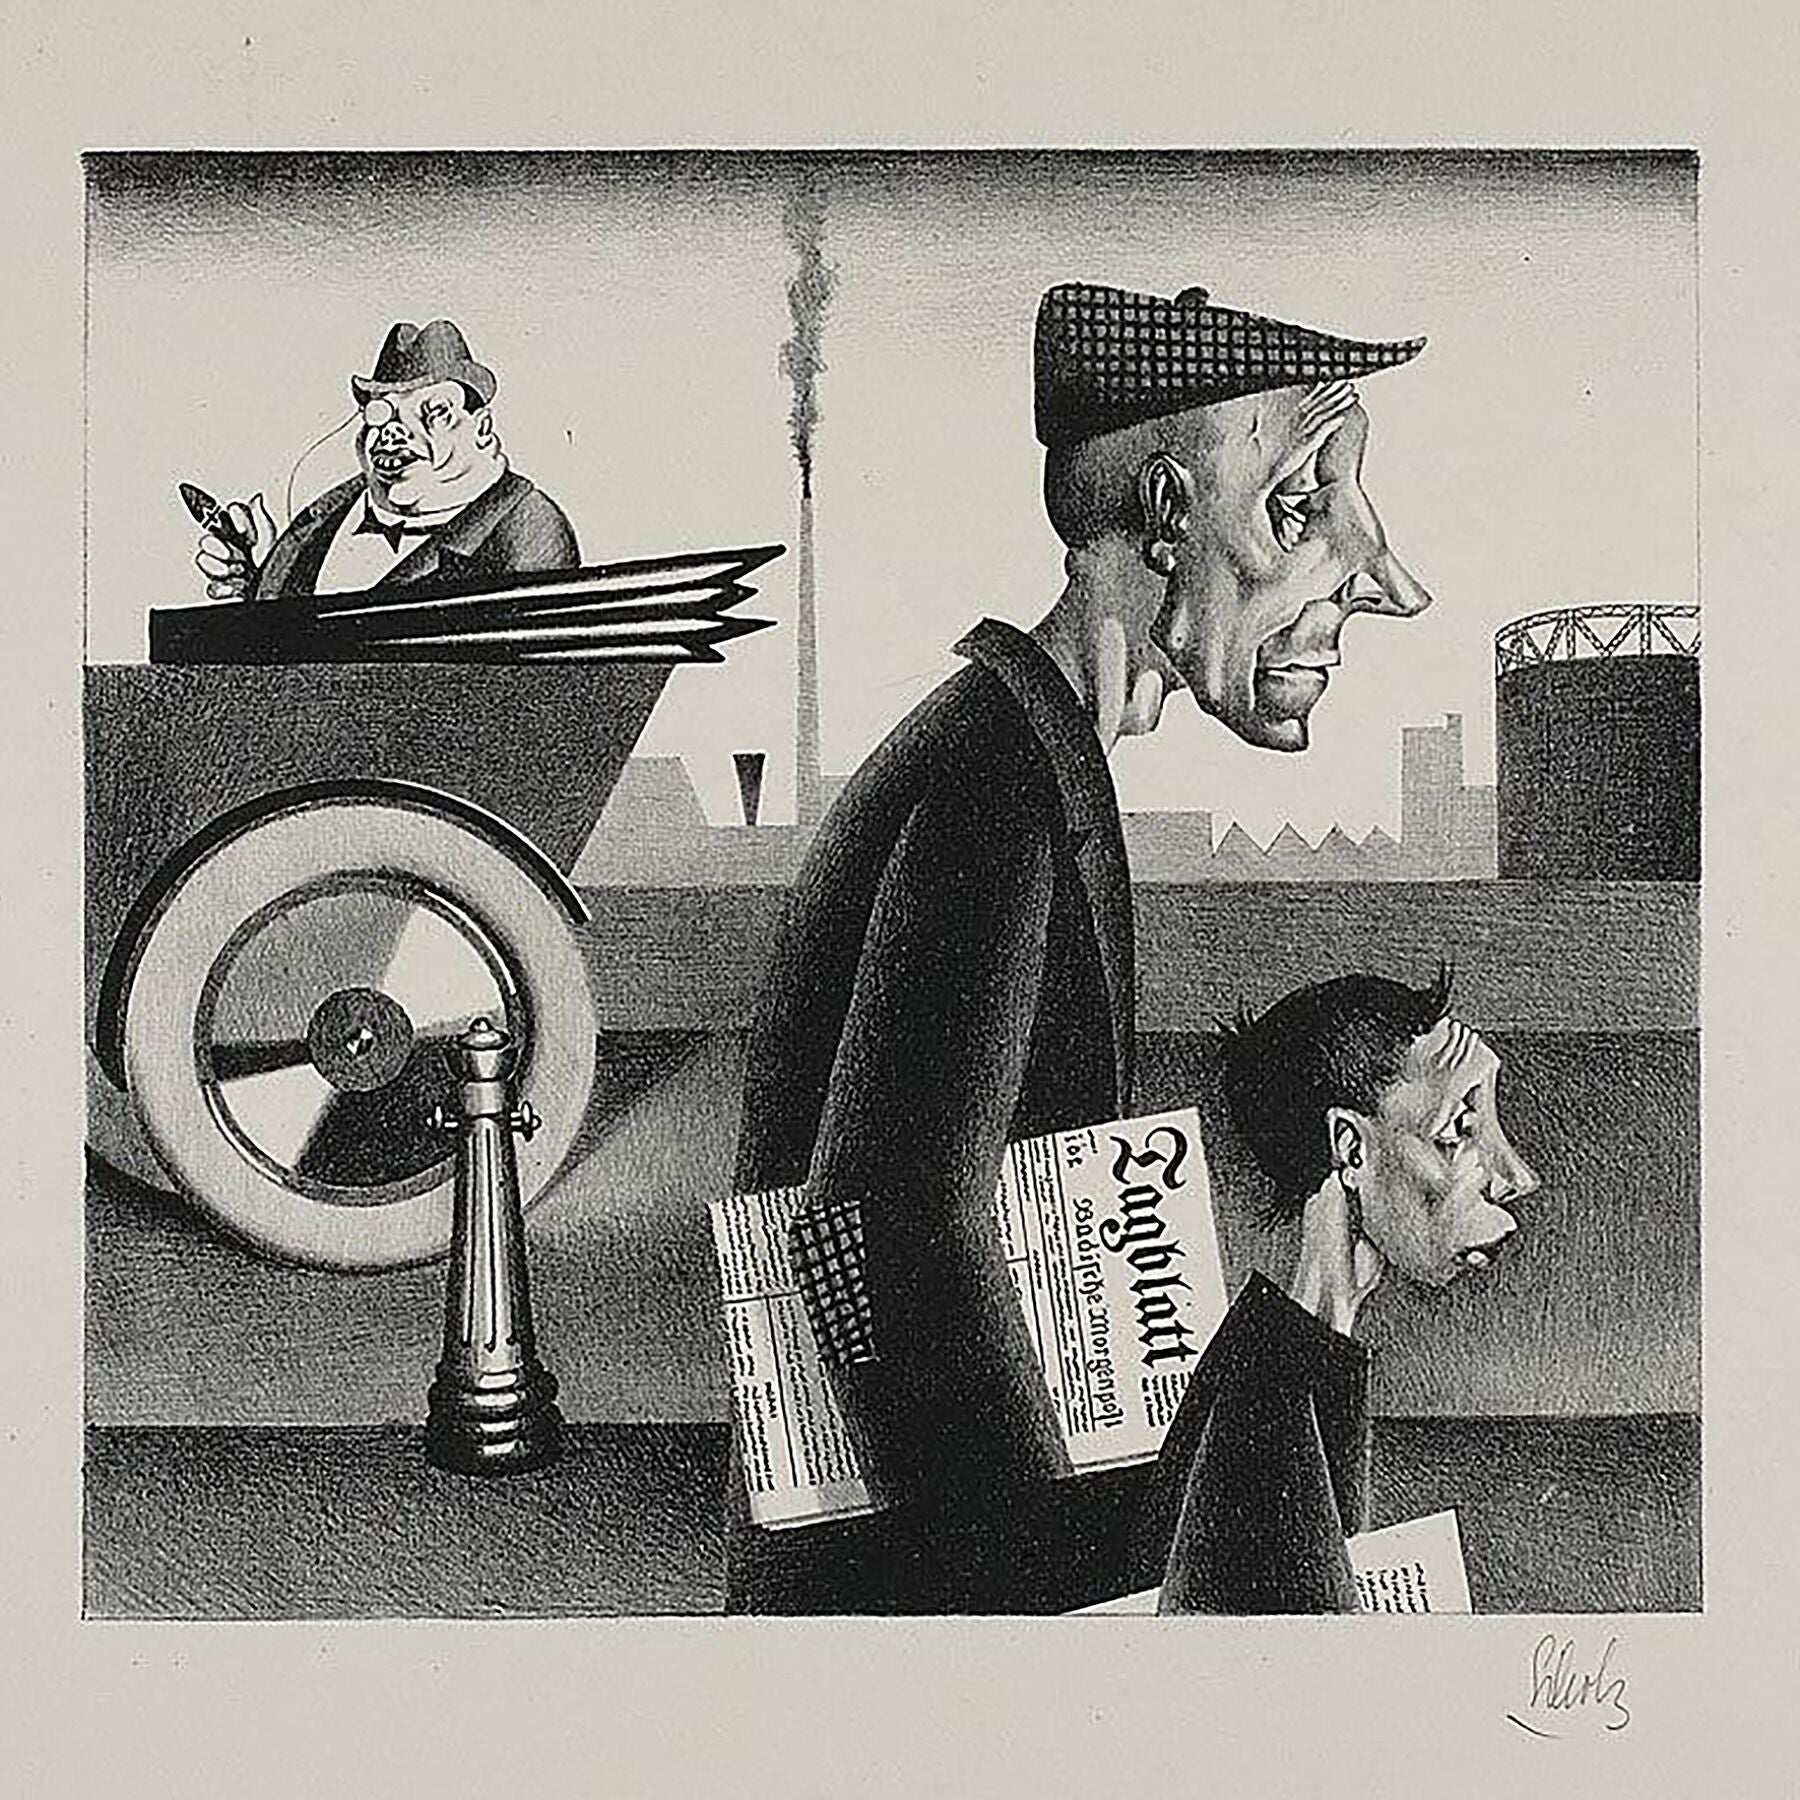 Newspaper Carriers (Work Disgraces) by Artist- Georg Scholz - 1921